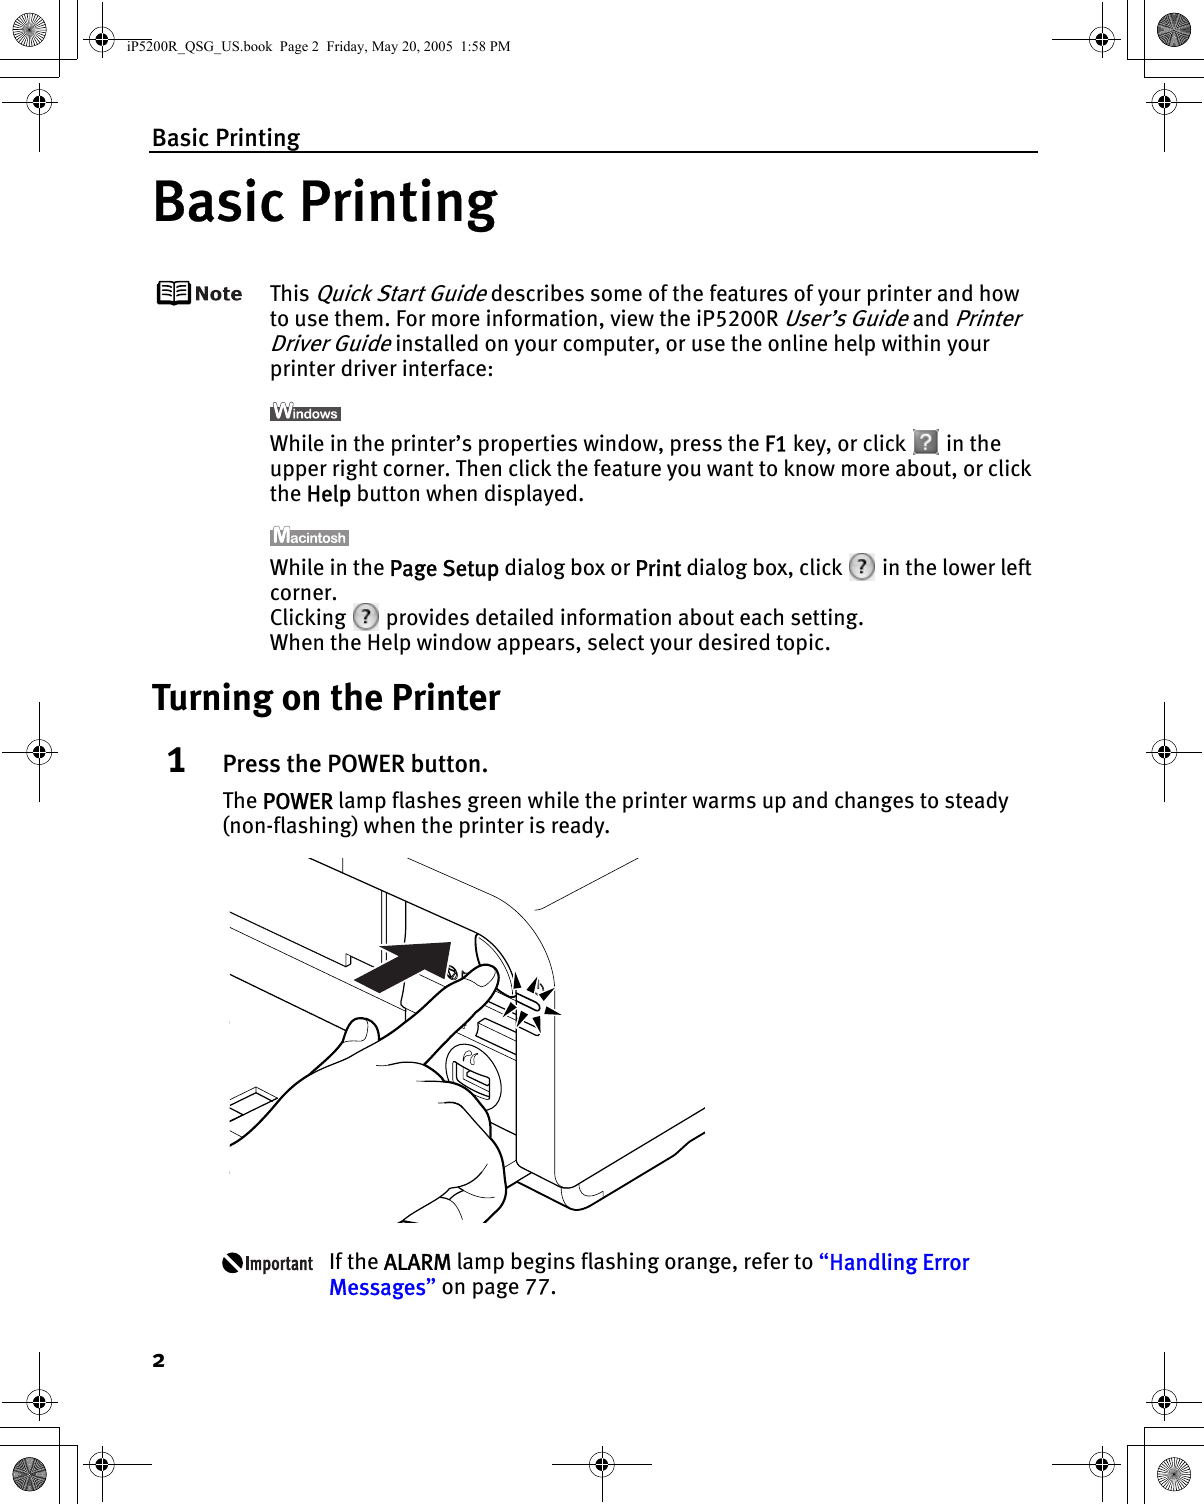 Basic Printing2Basic PrintingThis Quick Start Guide describes some of the features of your printer and how to use them. For more information, view the iP5200R User’s Guide and Printer Driver Guide installed on your computer, or use the online help within your printer driver interface:While in the printer’s properties window, press the F1 key, or click   in the upper right corner. Then click the feature you want to know more about, or click the Help button when displayed.While in the Page Setup dialog box or Print dialog box, click   in the lower left corner.Clicking   provides detailed information about each setting.When the Help window appears, select your desired topic.Turning on the Printer1Press the POWER button.The POWER lamp flashes green while the printer warms up and changes to steady (non-flashing) when the printer is ready.If the ALARM lamp begins flashing orange, refer to “Handling Error Messages” on page 77.iP5200R_QSG_US.book  Page 2  Friday, May 20, 2005  1:58 PM